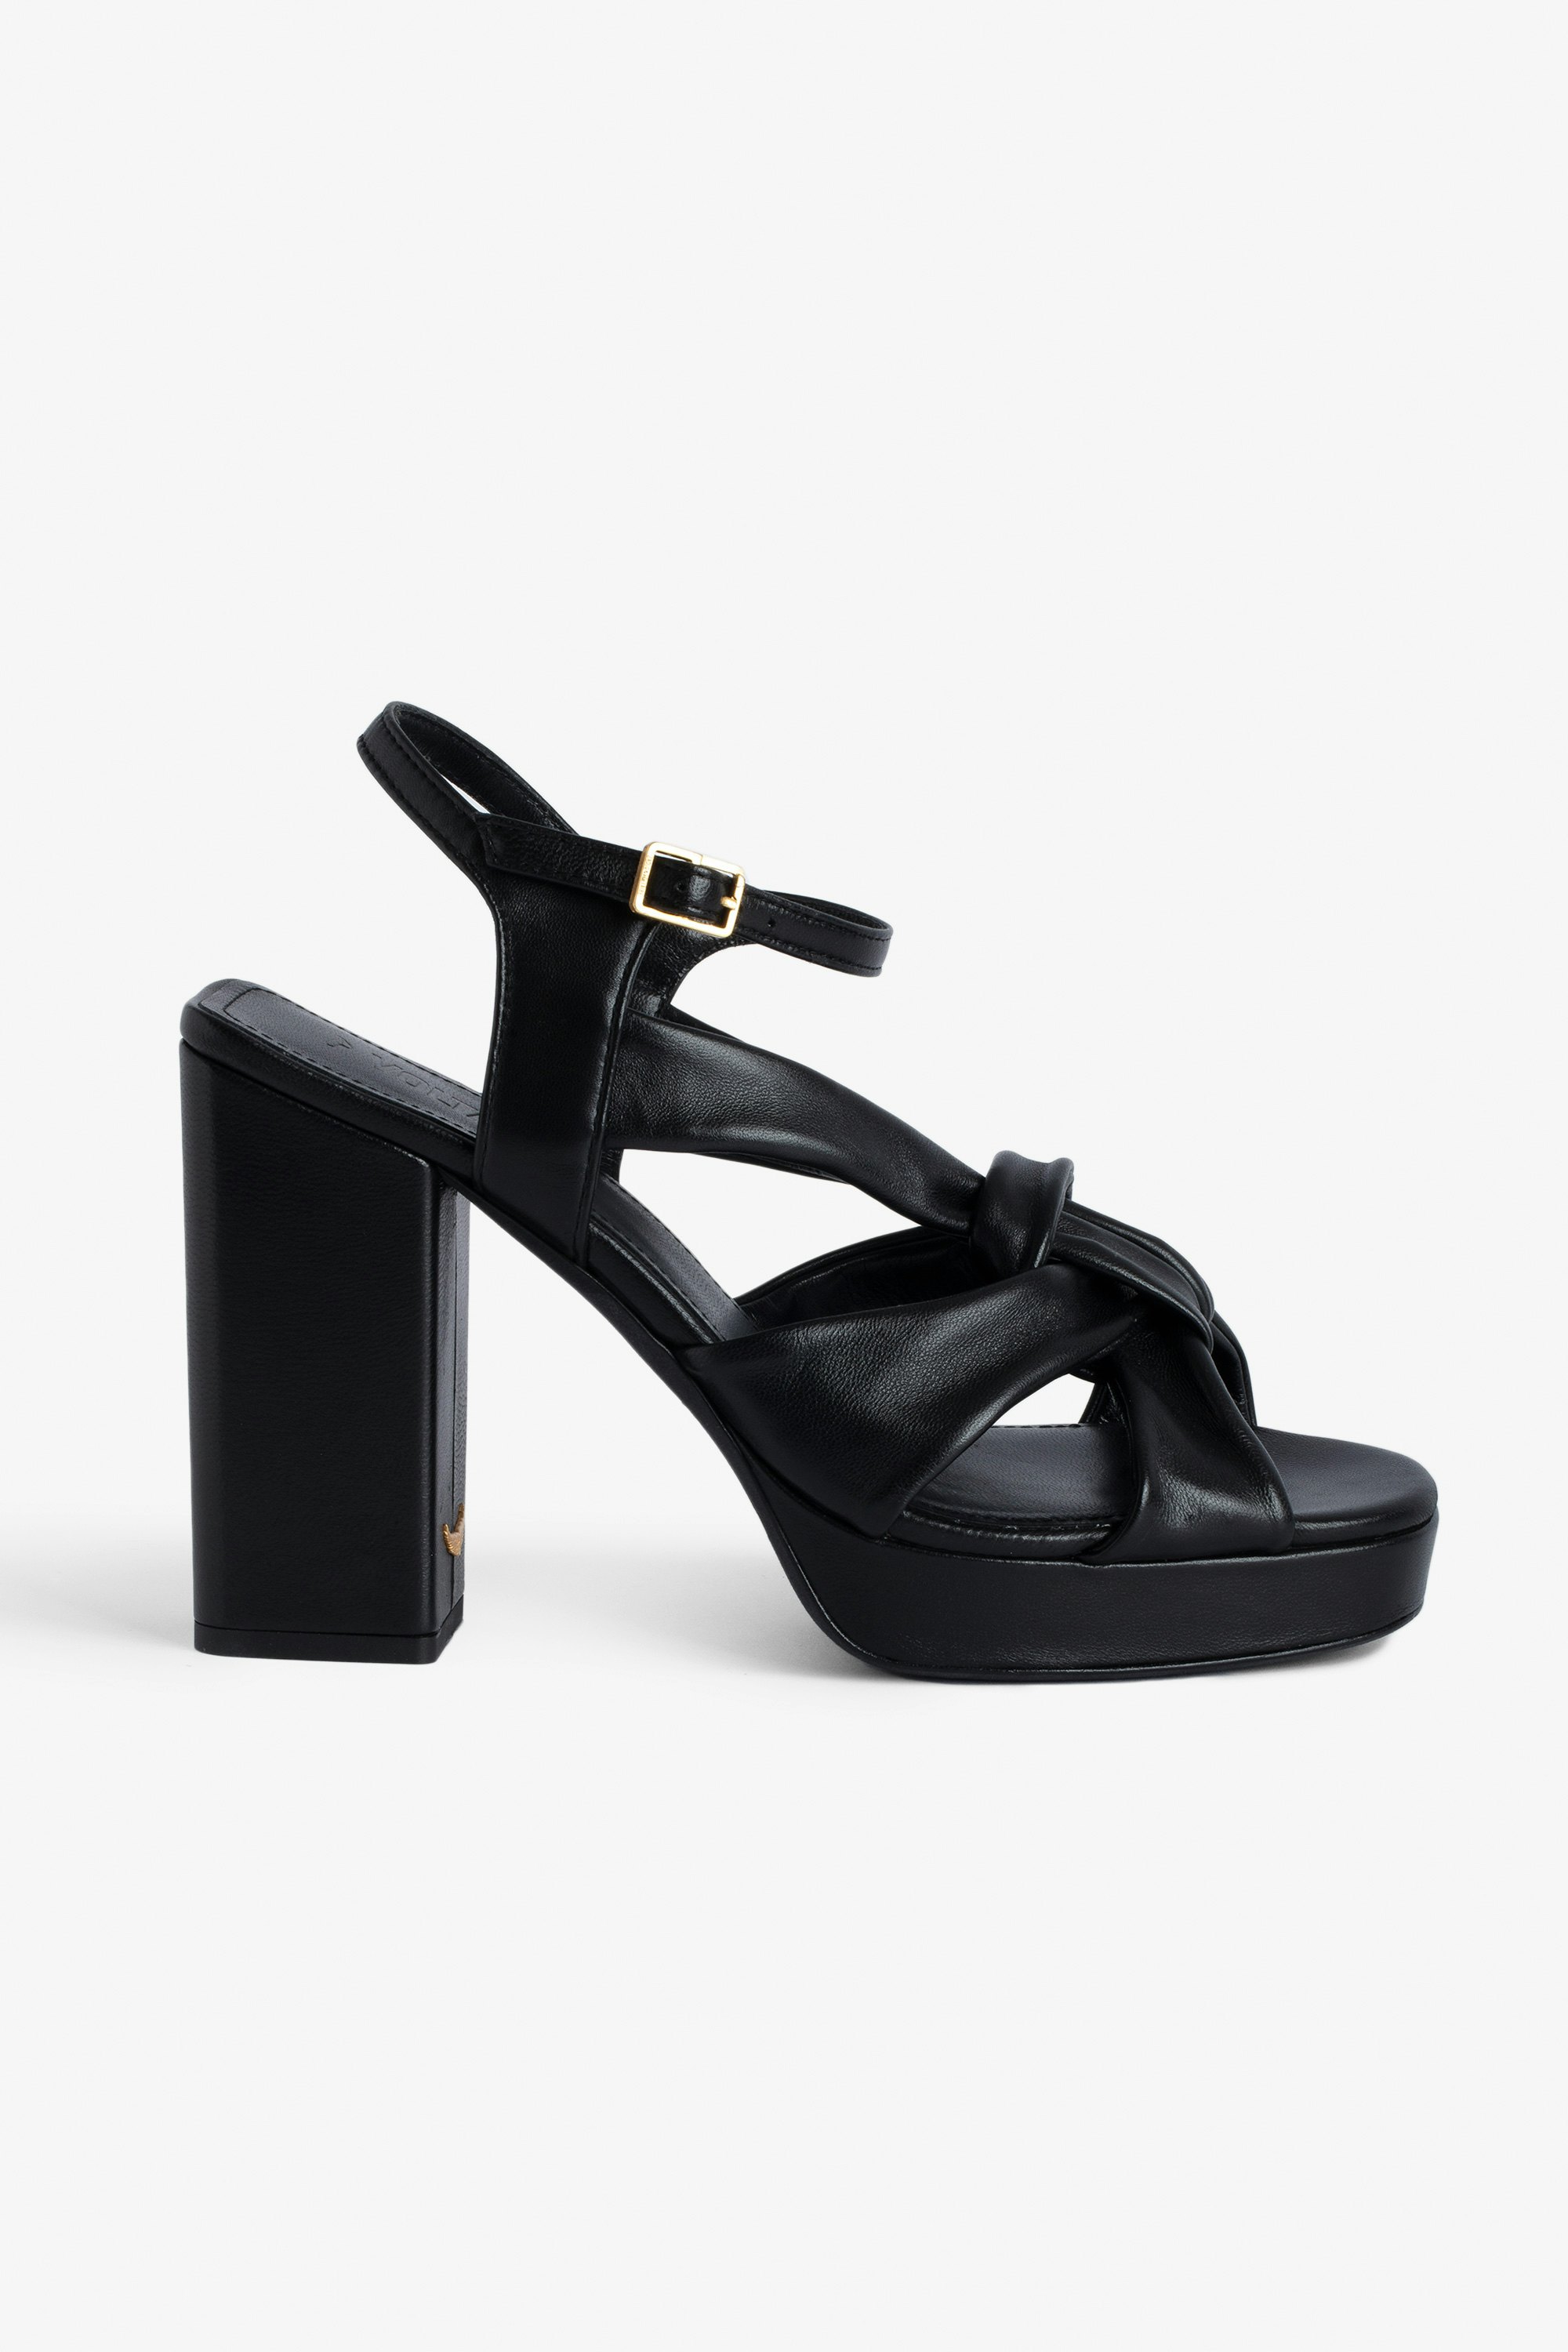 Forget Me Knot Sandals - Women’s black leather high-heeled sandals with strap and bow.